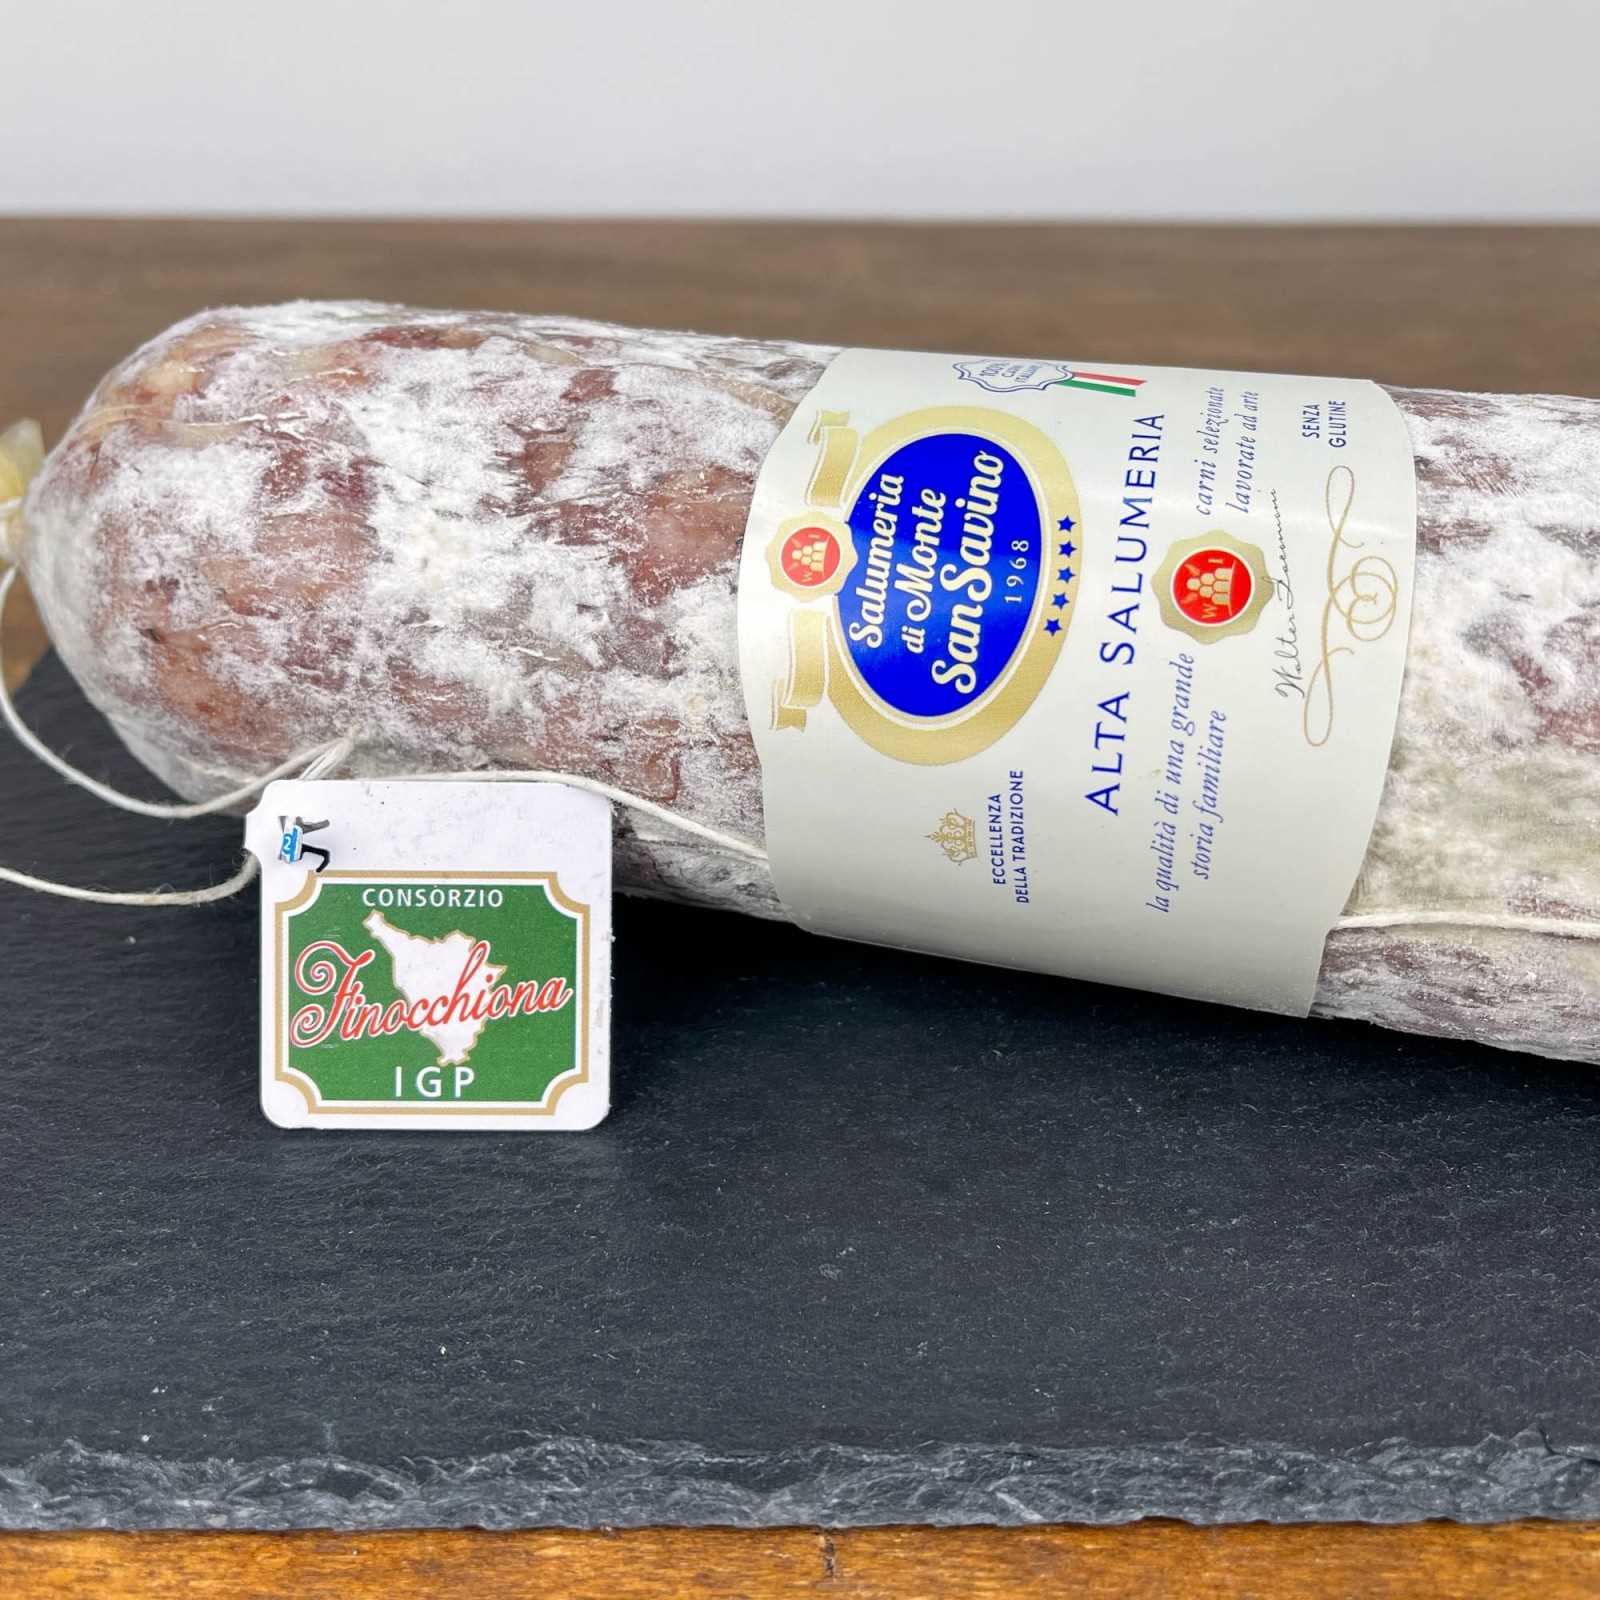 PGI Finocchiona is one of the most famous Tuscan cured meats. It is produced with pork of excellent quality, minced and kneaded, to which wild fennel seeds are added, which give it the characteristic fresh and at the same time intense aroma. These two versions of PGI Finocchiona have a net weight of about 1 kg or 3 kg, are packaged in natural casing and are characterized by a large slice of about 8/12 centimeters in diameter.